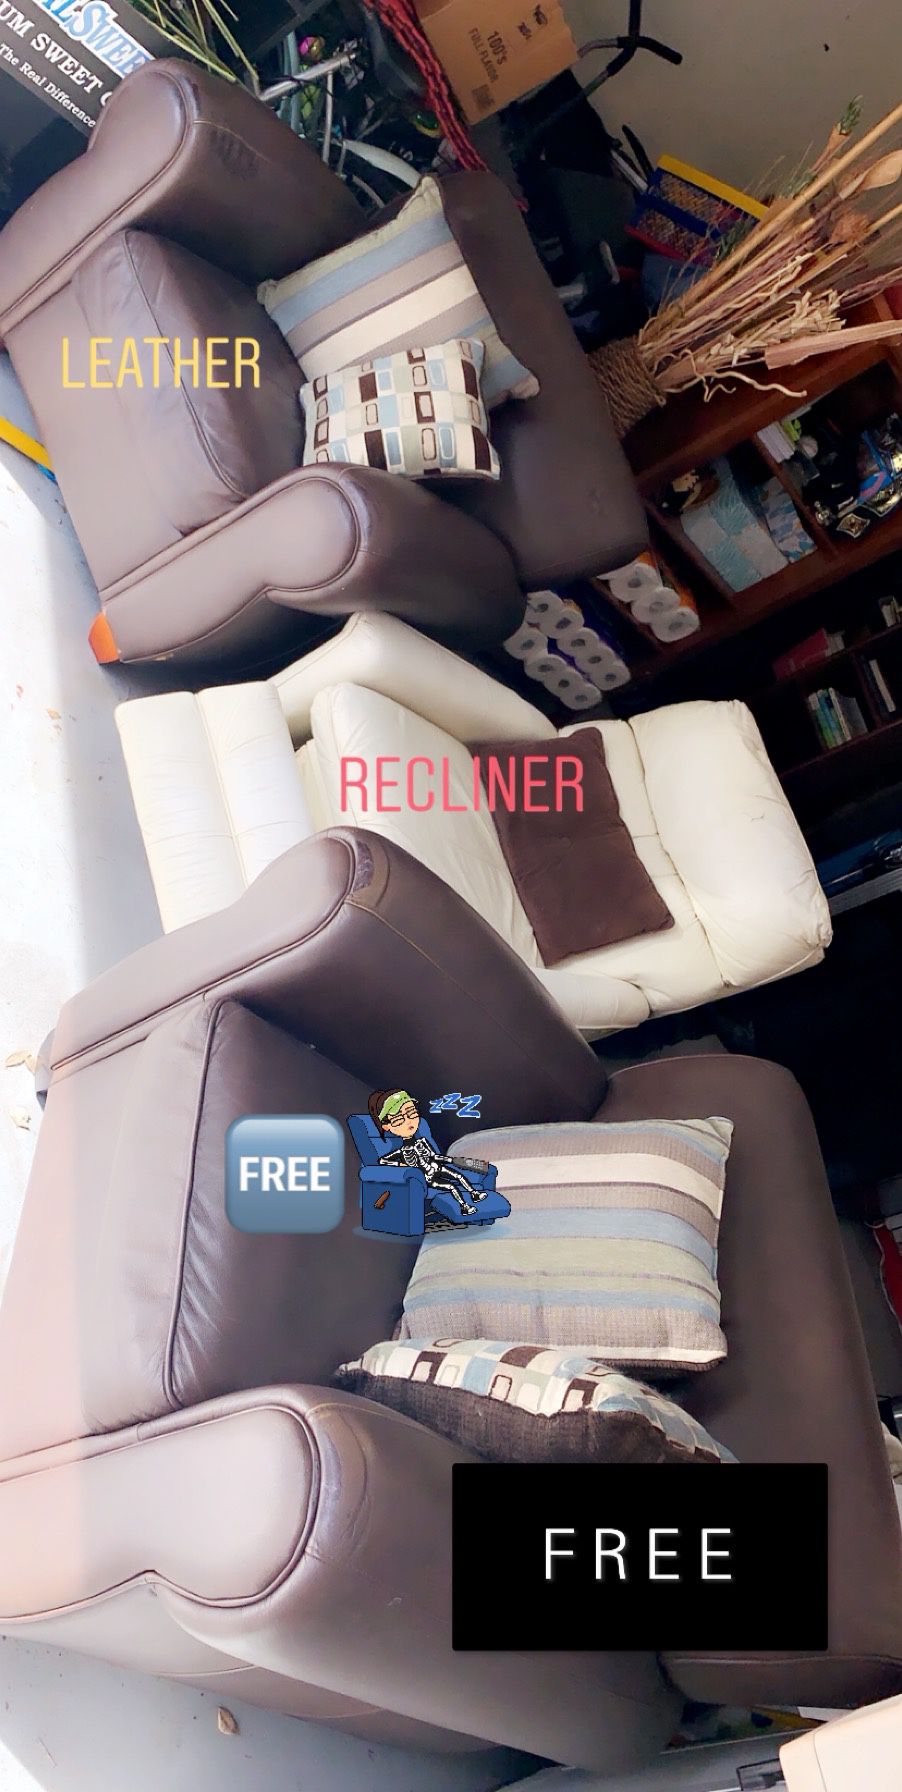 FREE Leather sofa chairs/recliner